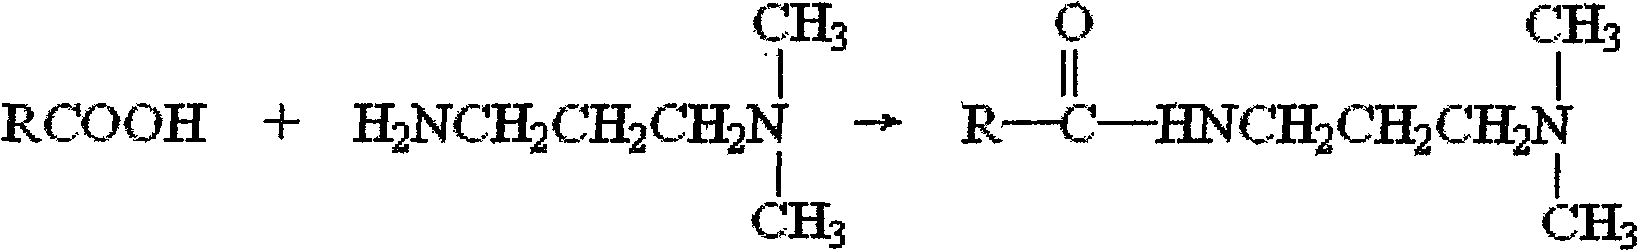 Synthesis method of cocoamidopropyl-2-hydroxyl-3-sulfopropyl betaine